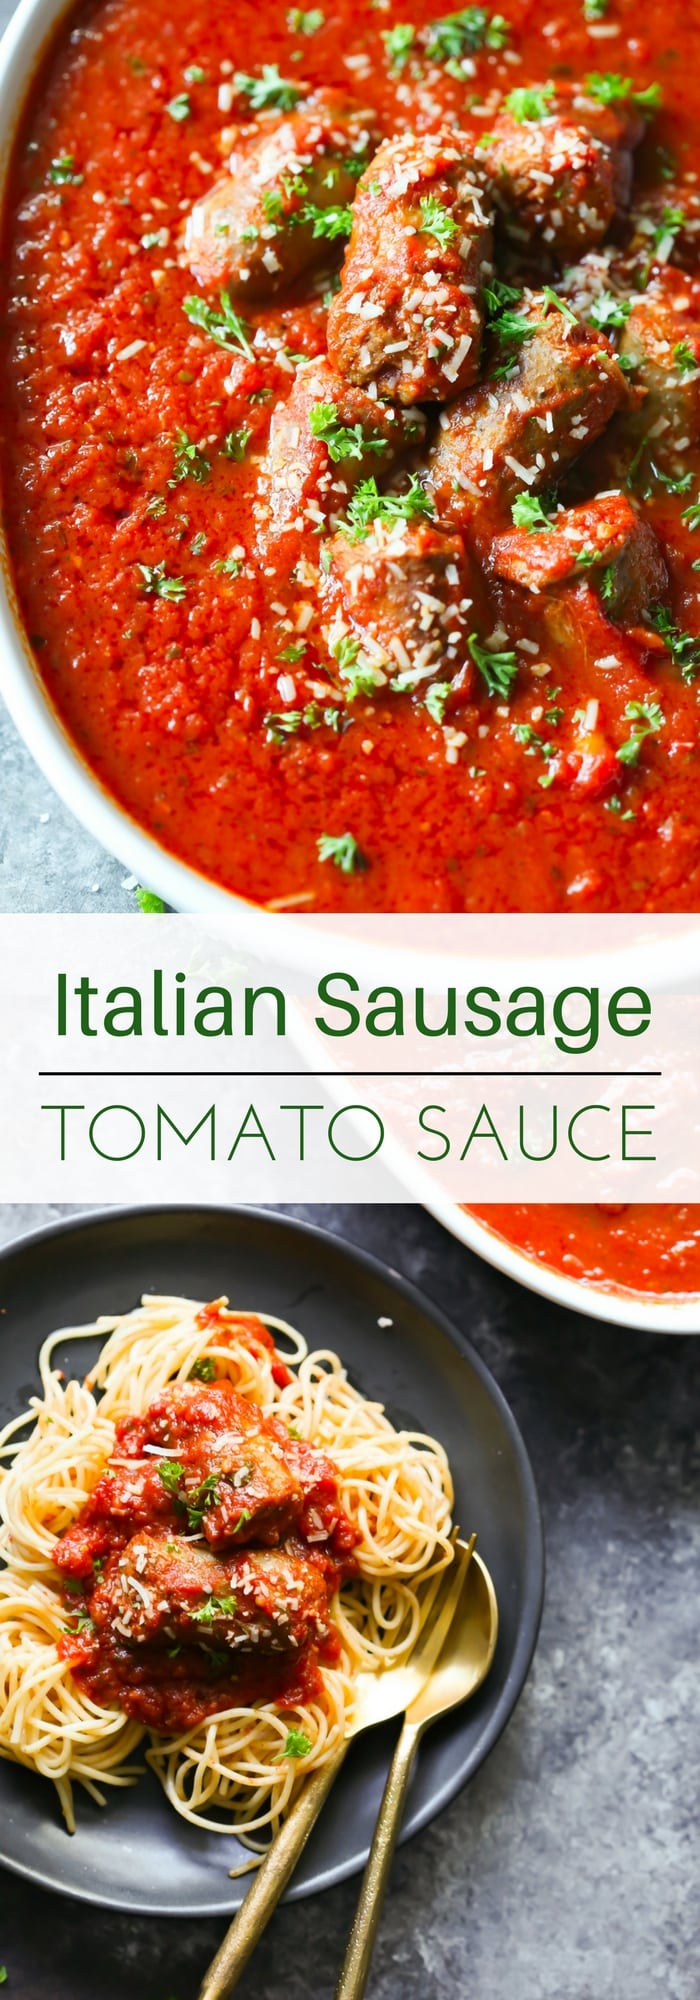 This Italian Sausage Tomato Sauce is loaded with tomatoes and spices. It's great over zucchini noodles, pasta, mashed potatoes and even on its own. 